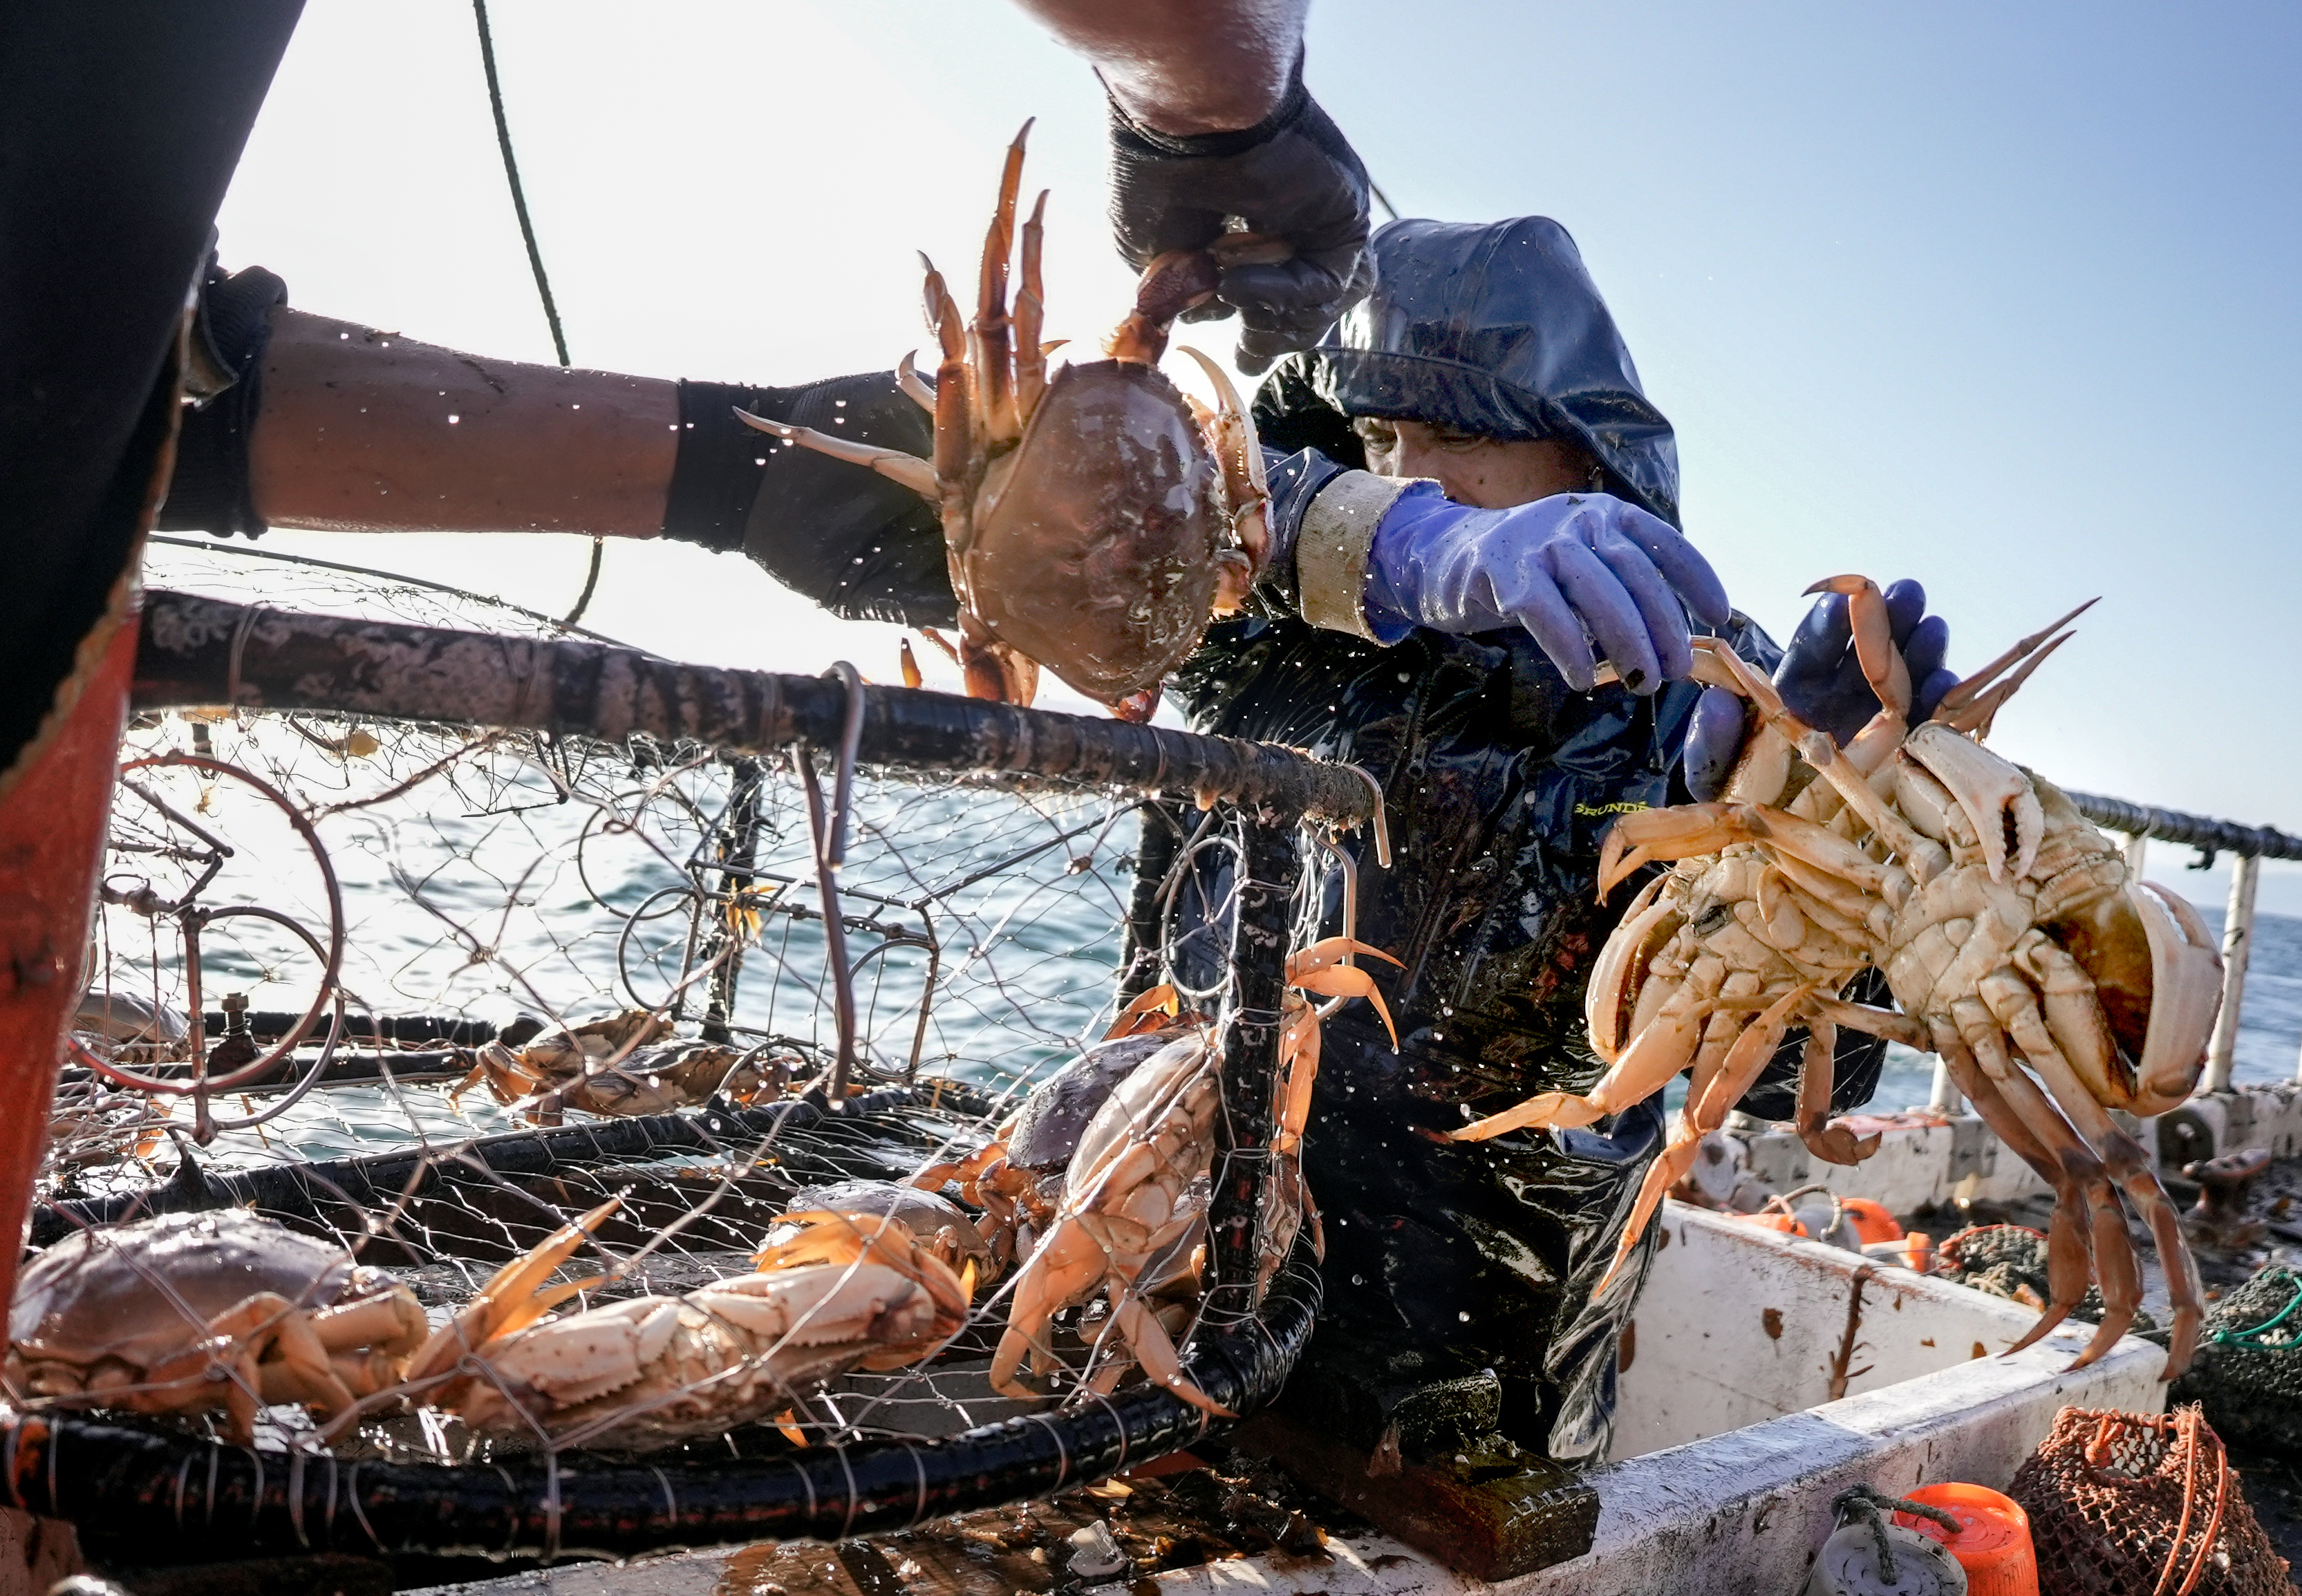 How valuable, and volatile, crabbing can be along the Oregon Coast - OPB